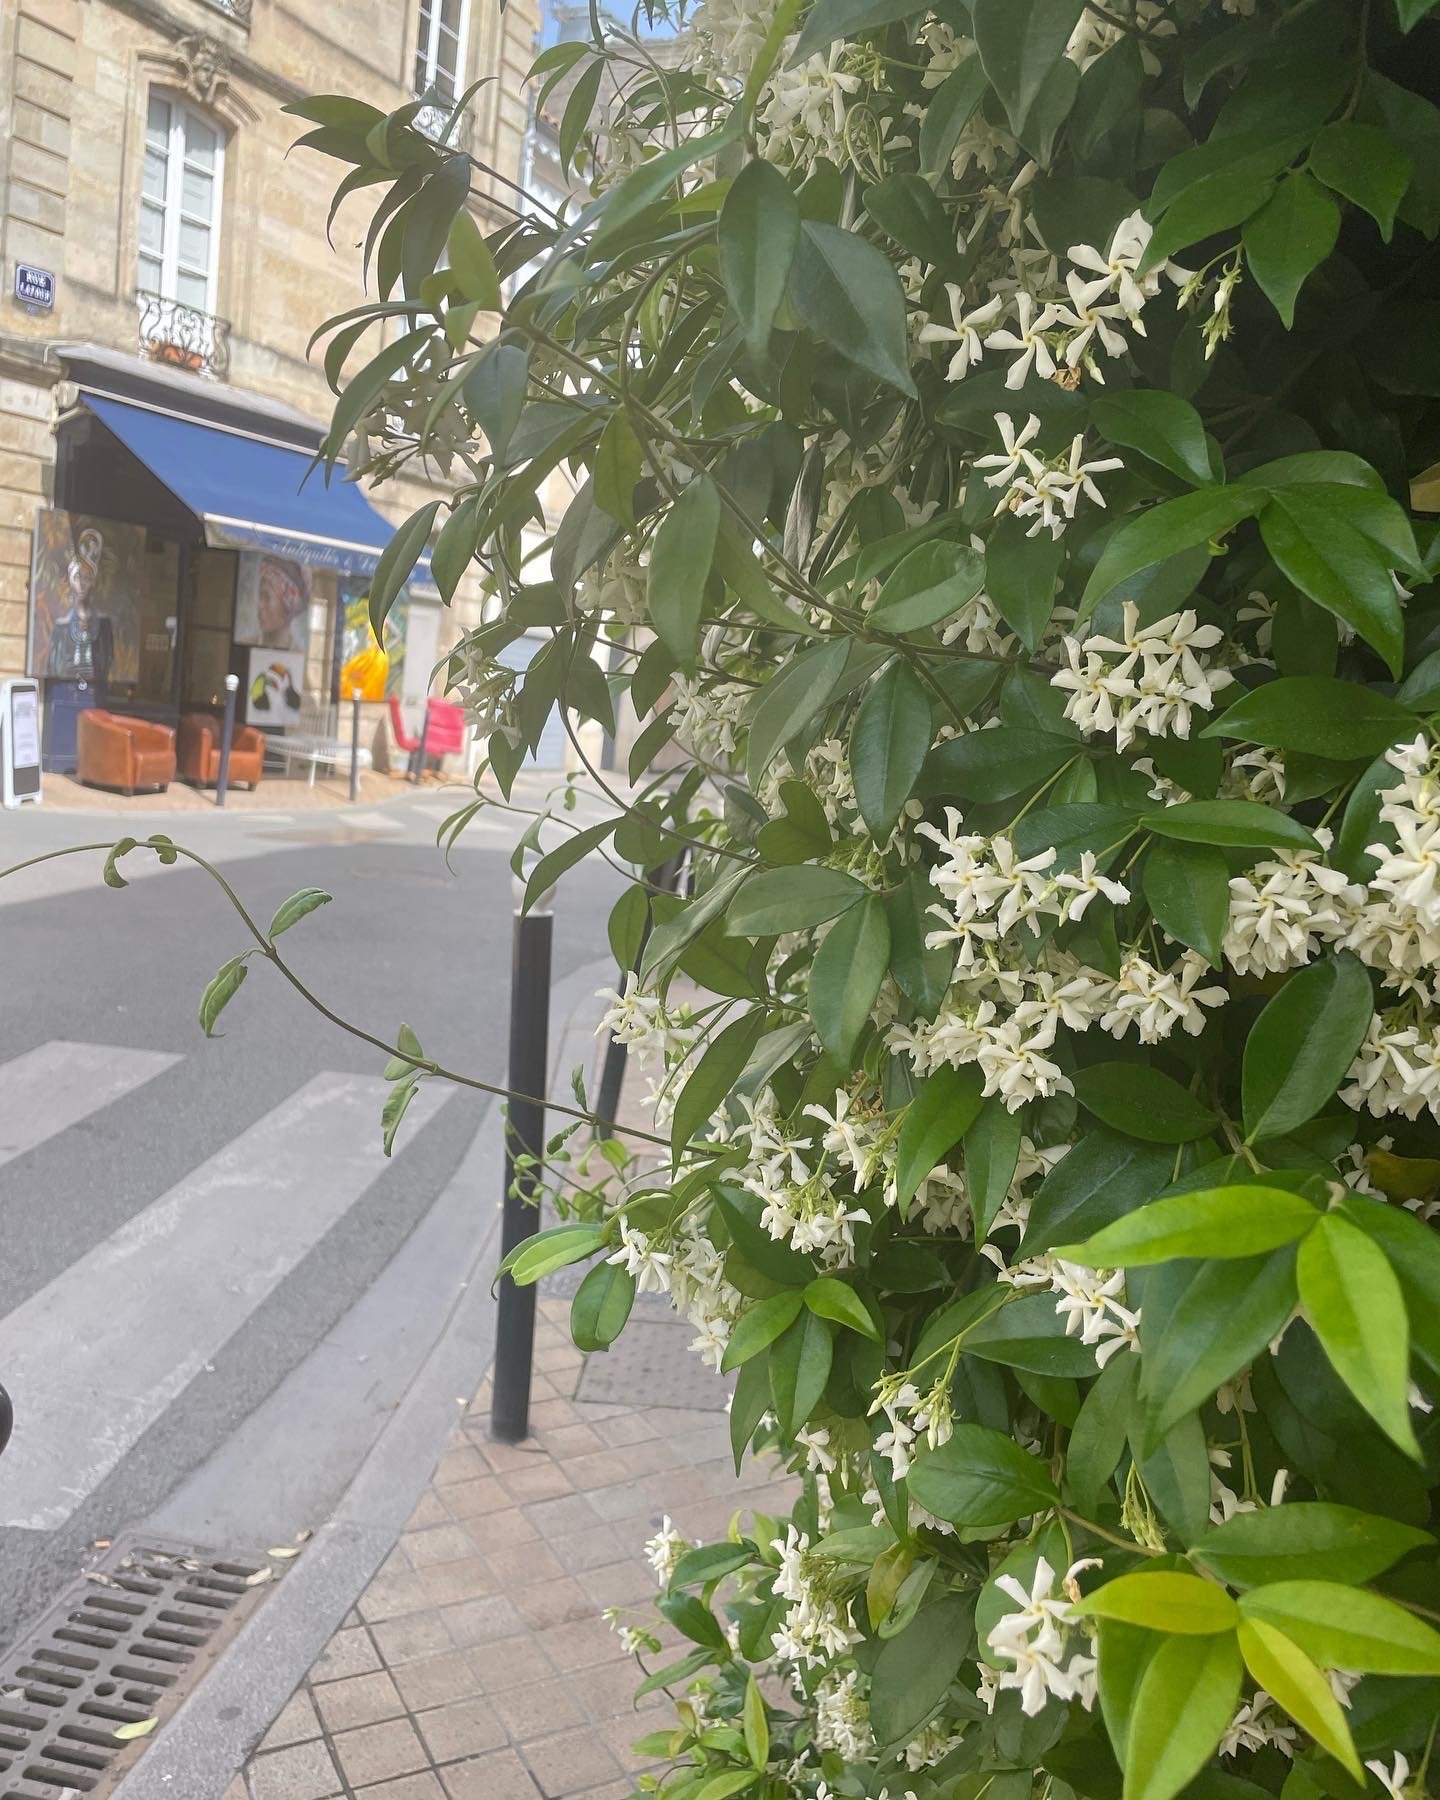 Perfumed streets in May